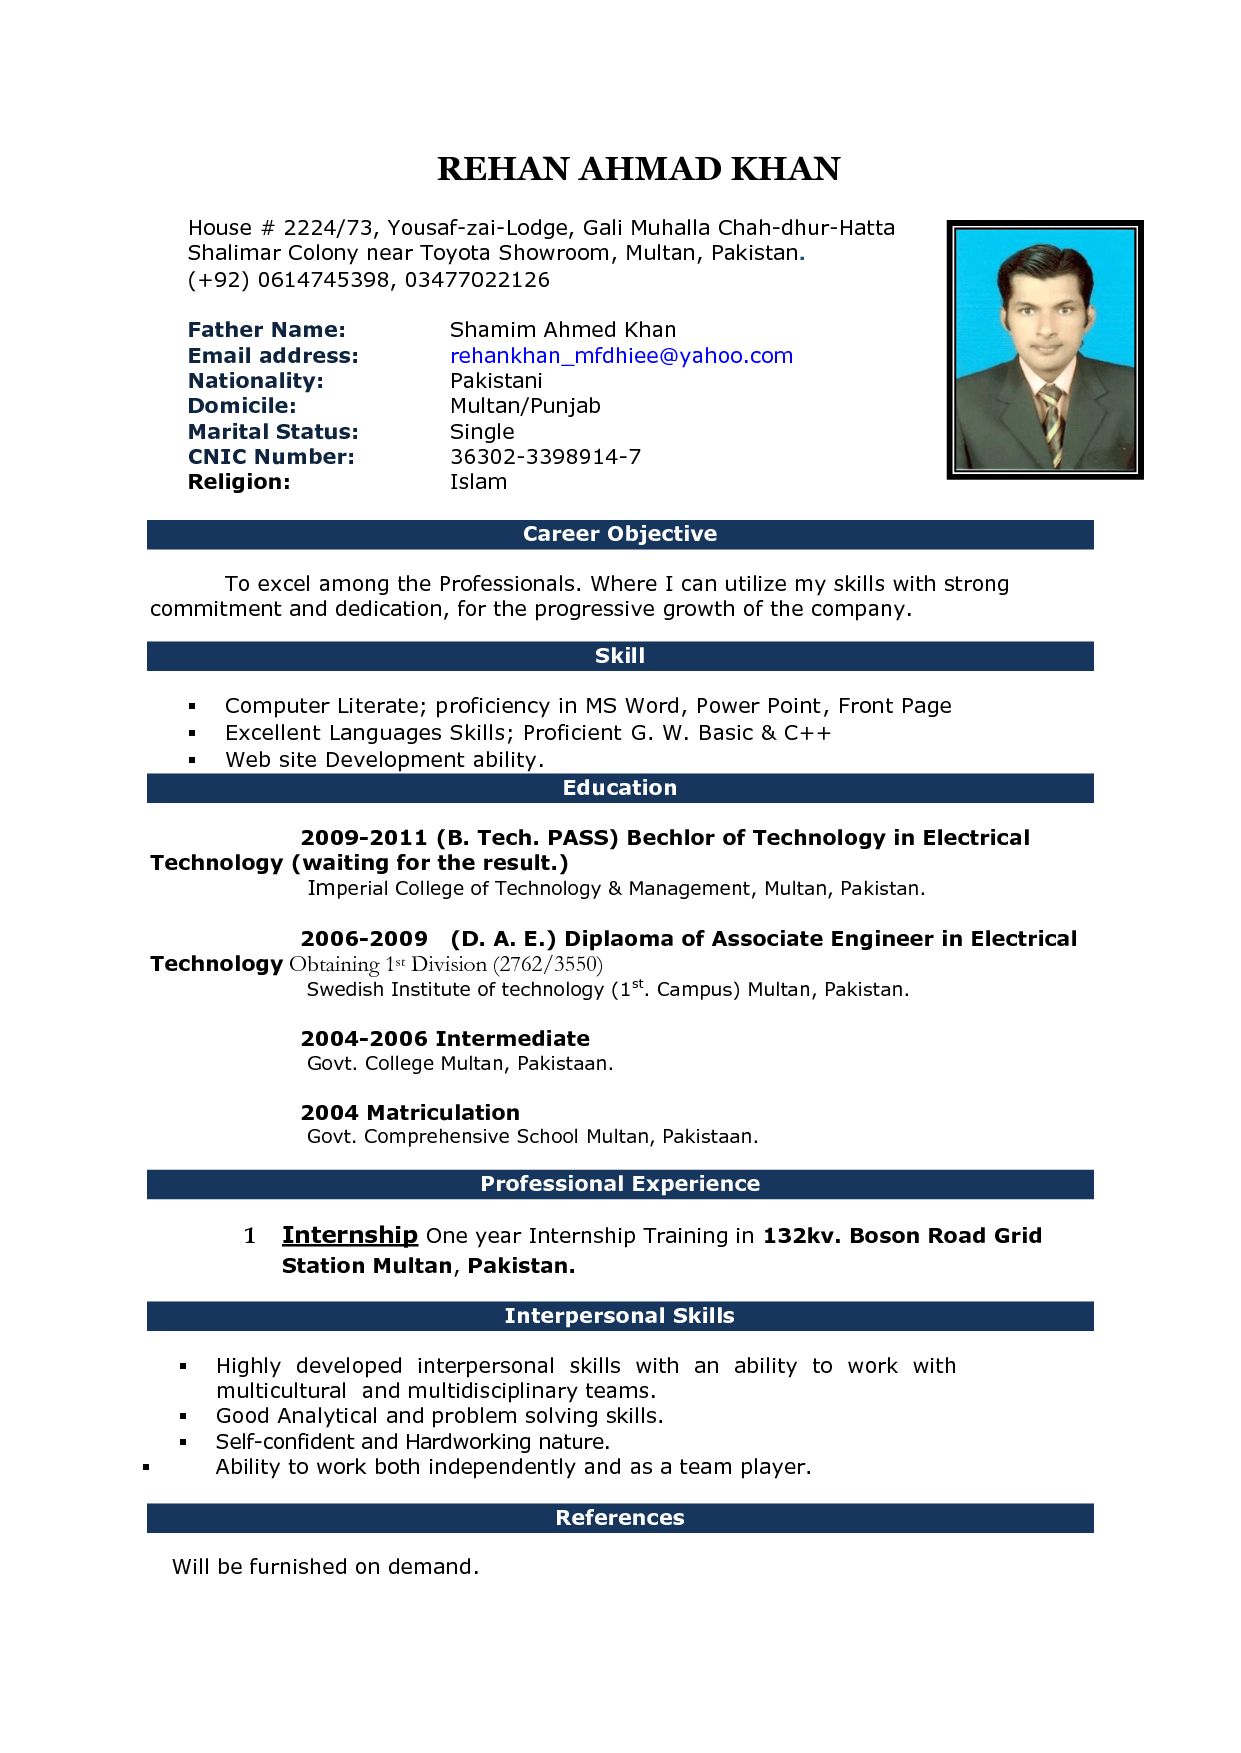 simple resume format doc file free download